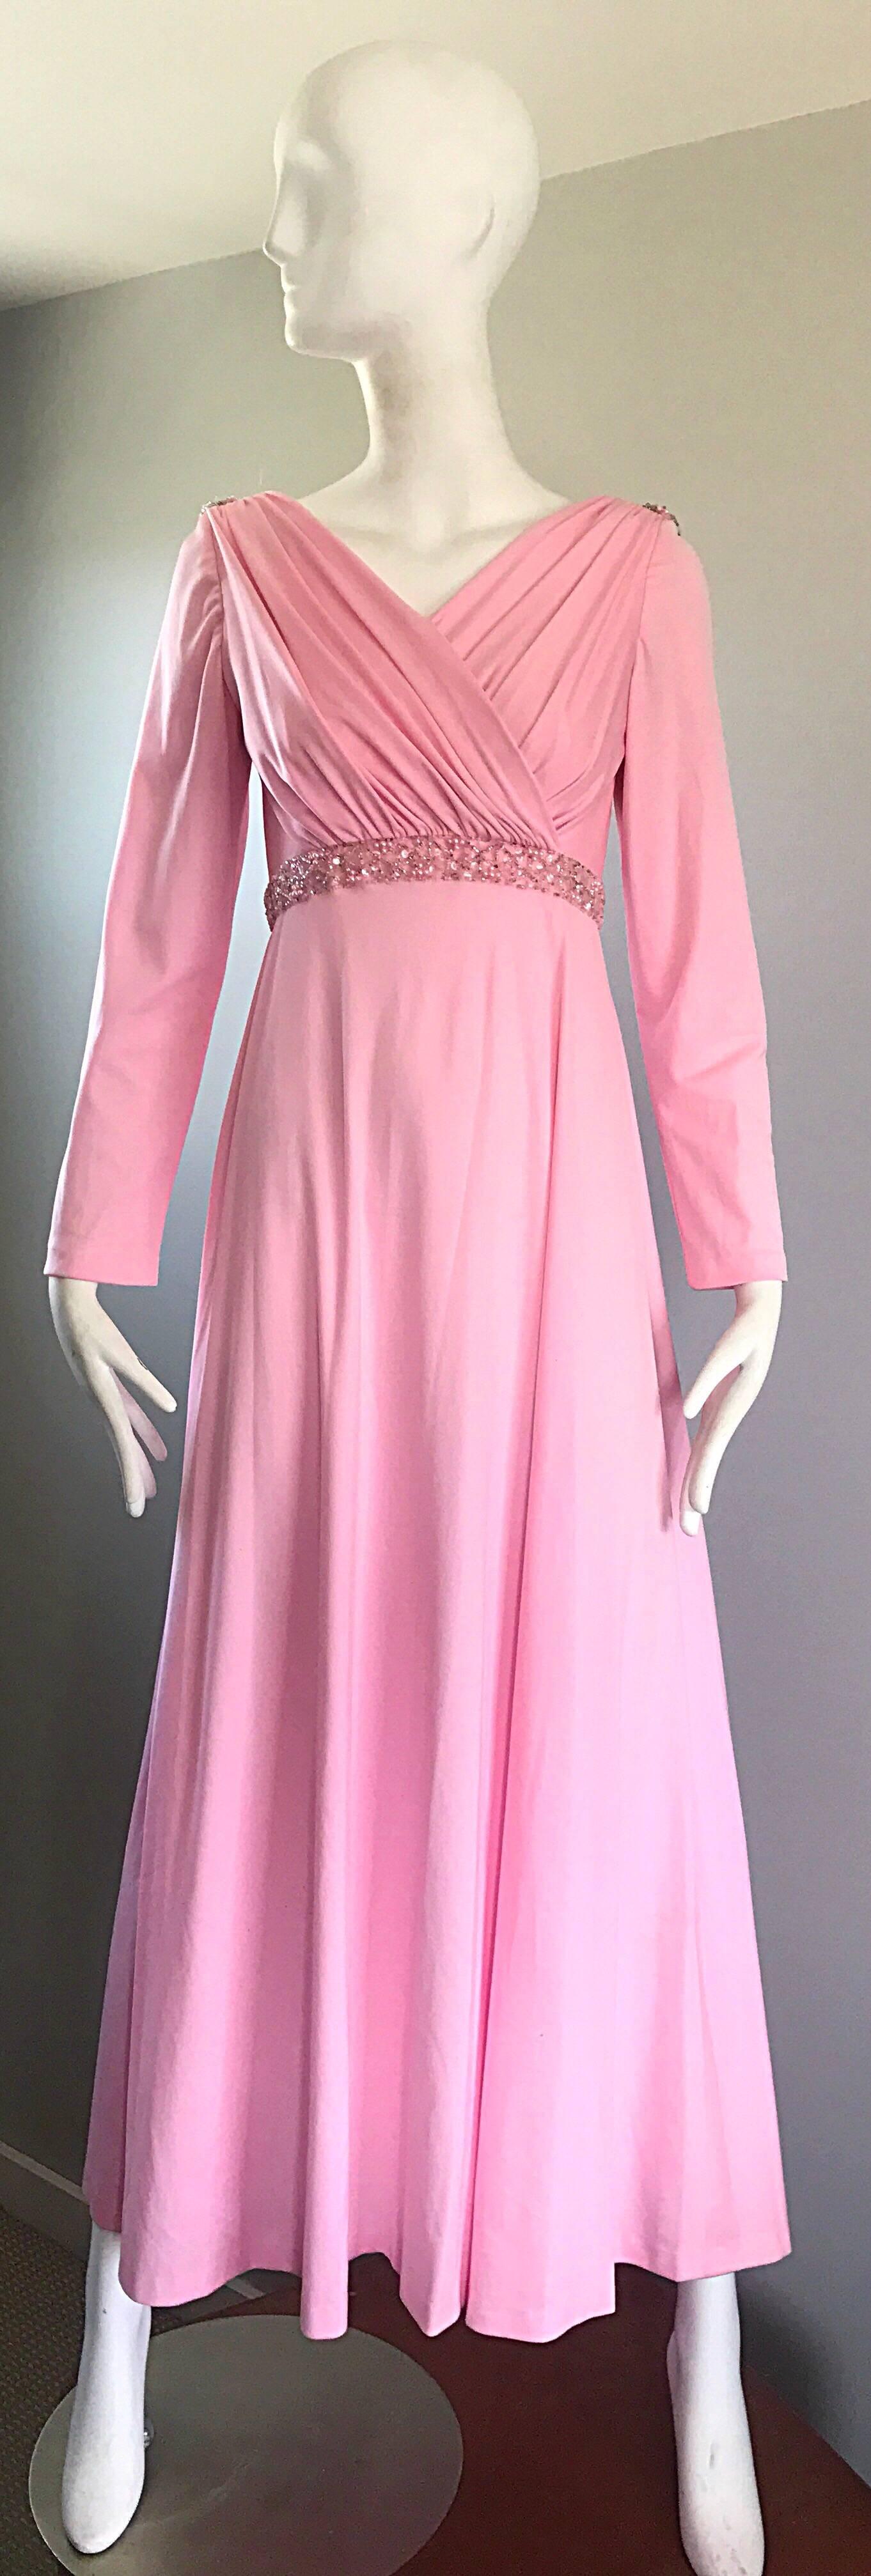 Amazing and gorgeous vintage 70s pale pink sequined and beaded long sleeve jersey gown / maxi dress! Features a pleated tailored bodice, encrusted with hand-sewn sequins and beads at the waist. Draped low cut back is also encrusted with hand-sewn